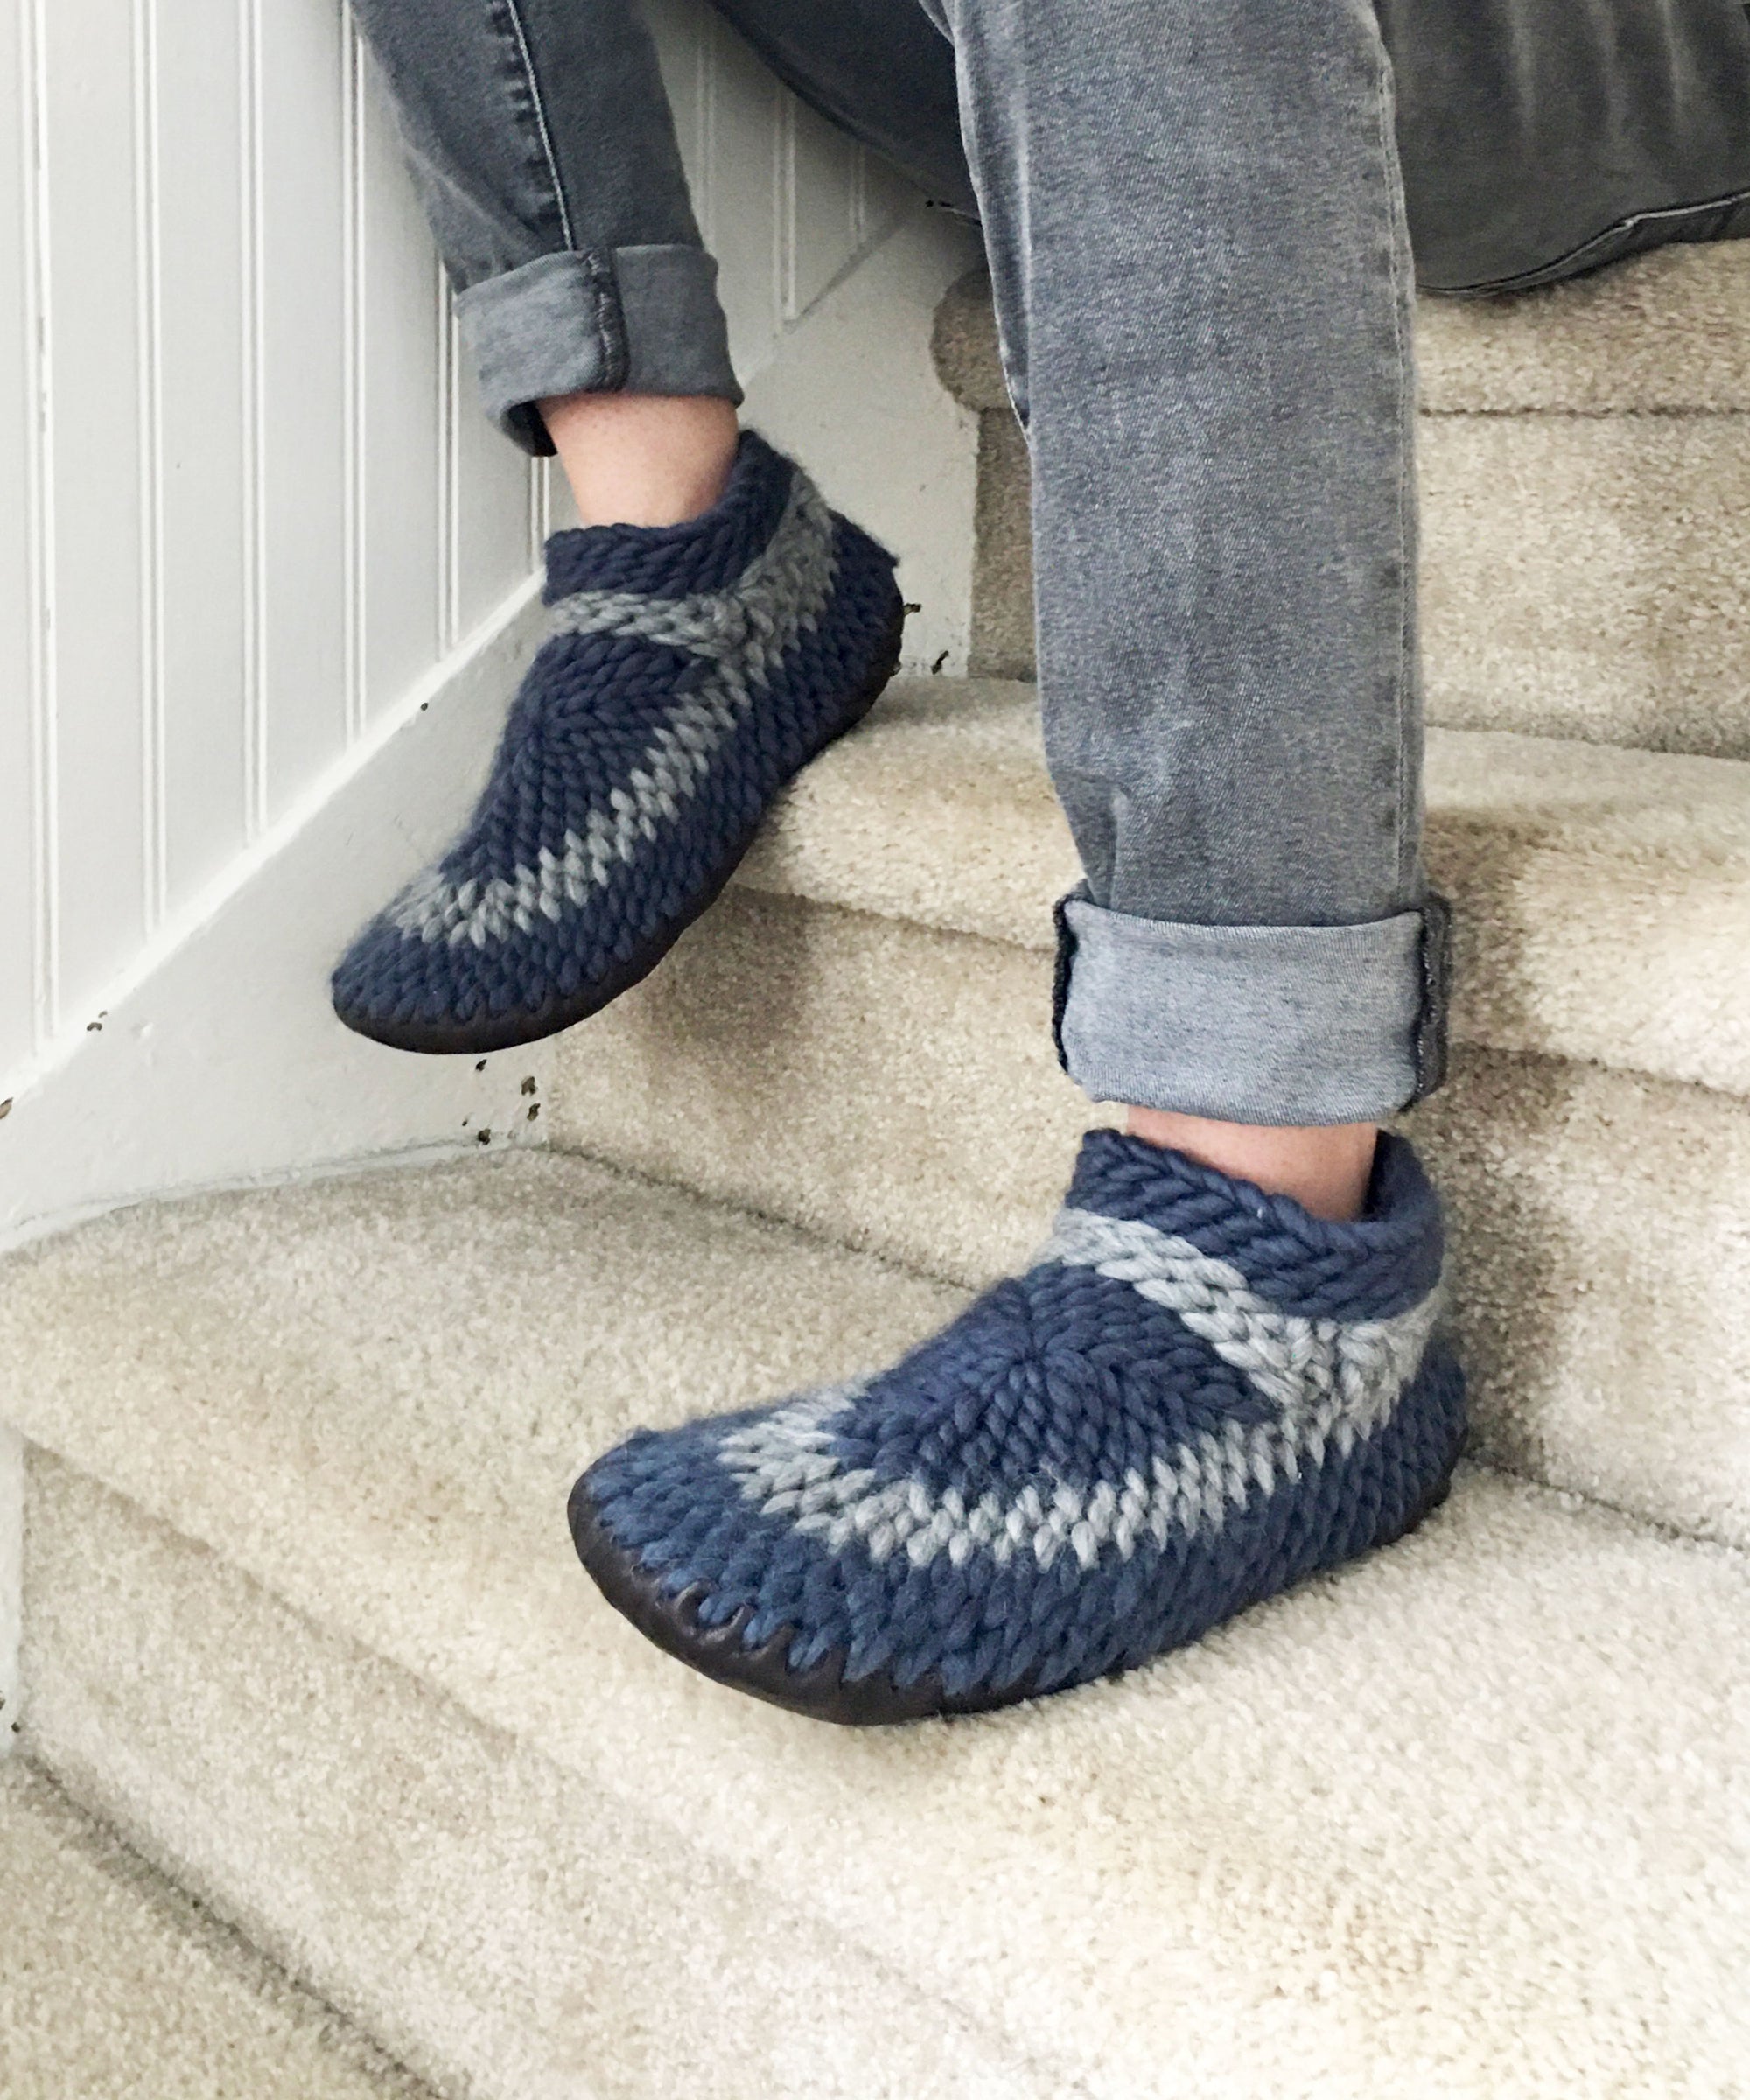 Blue Merino Wool Slippers with leather soles for men and women, adult padraig style slippers